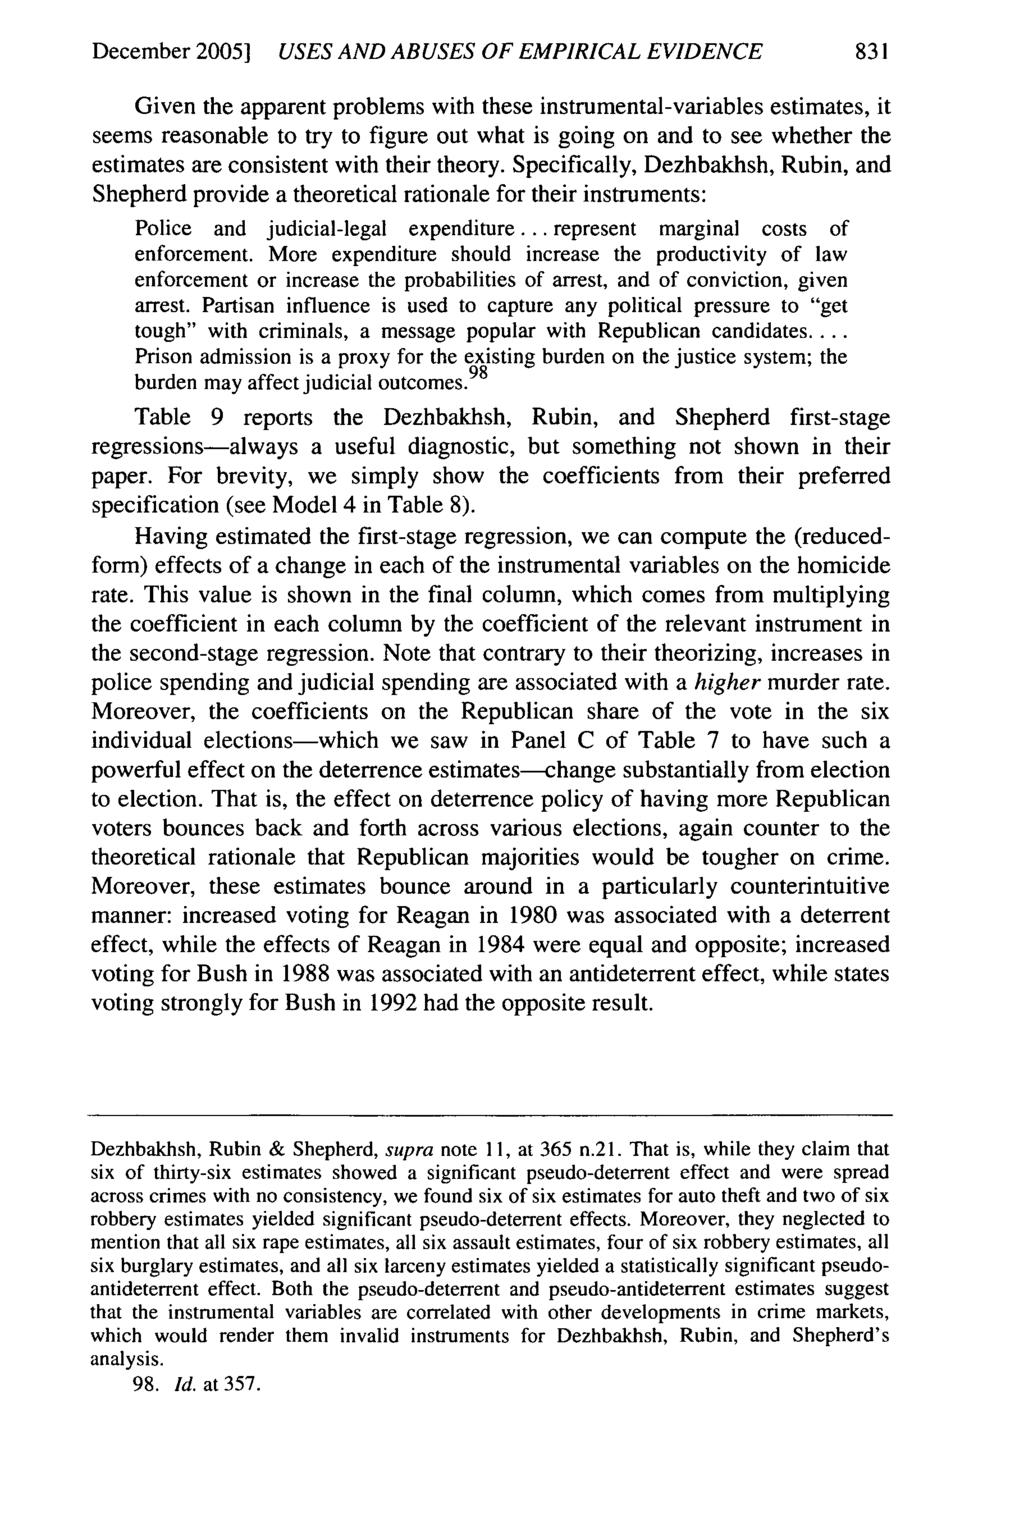 December 2005] USES AND ABUSES OF EMPIRICAL EVIDENCE 831 Given the apparent problems with these instrumental-variables estimates, it seems reasonable to try to figure out what is going on and to see